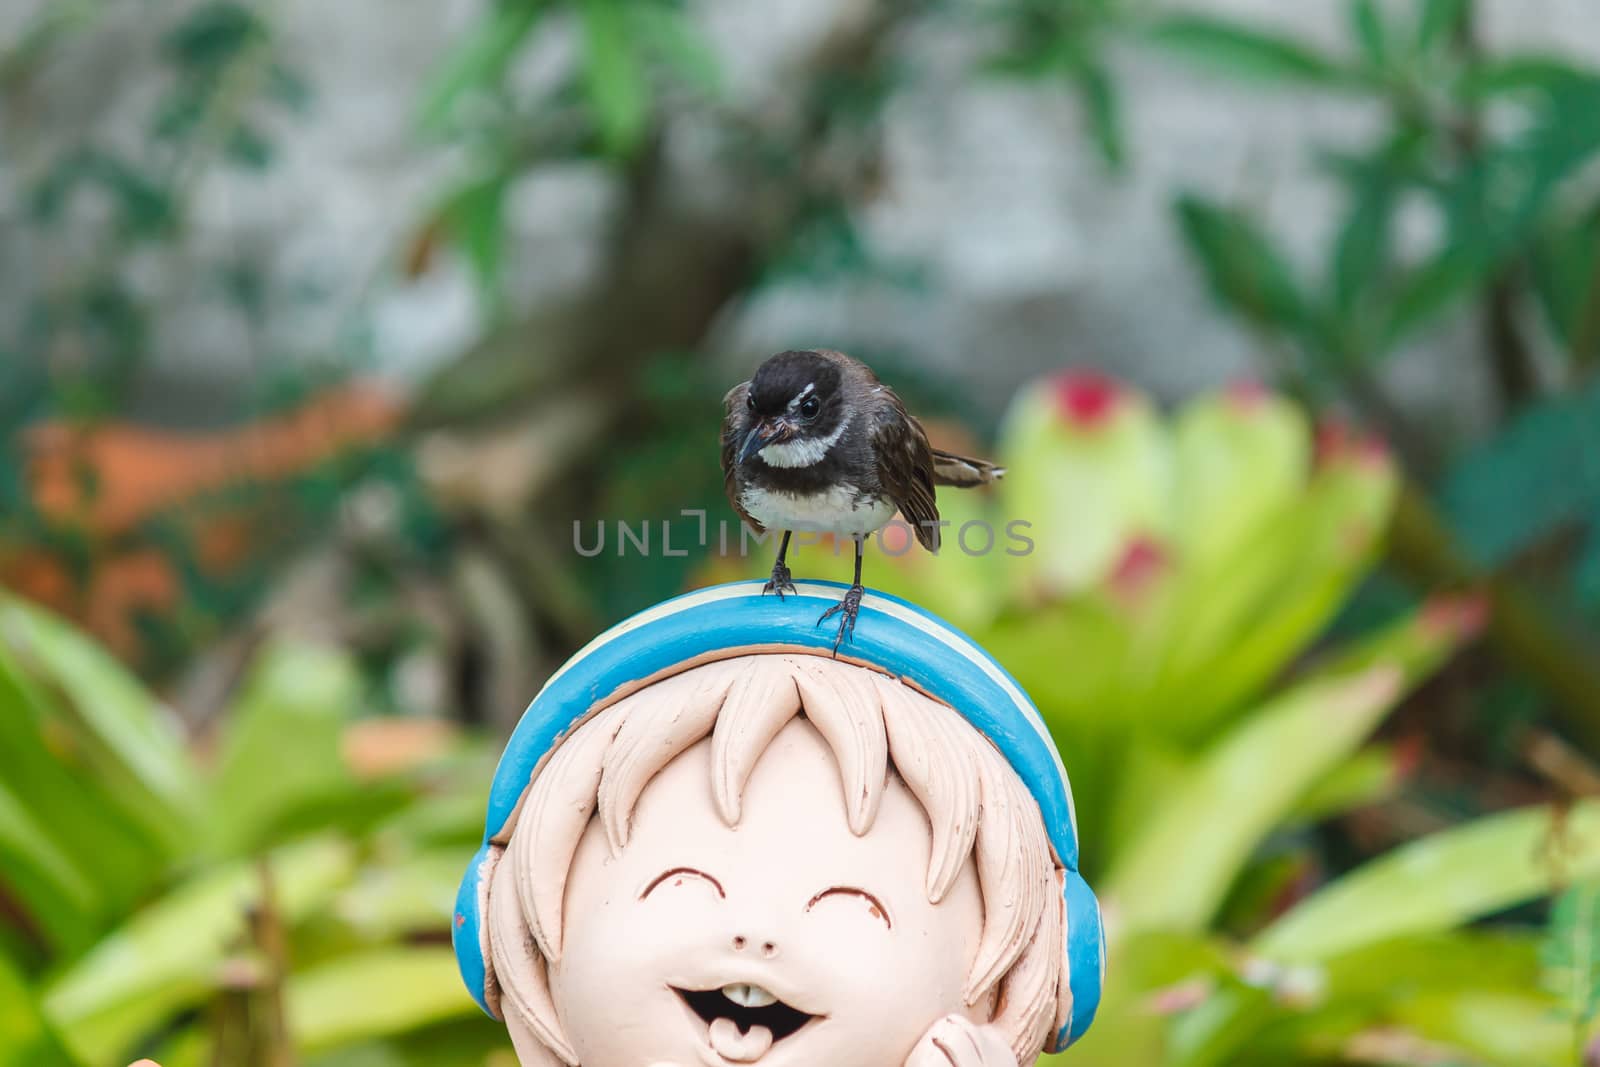 Fantail bird standing on the smiling clay doll.